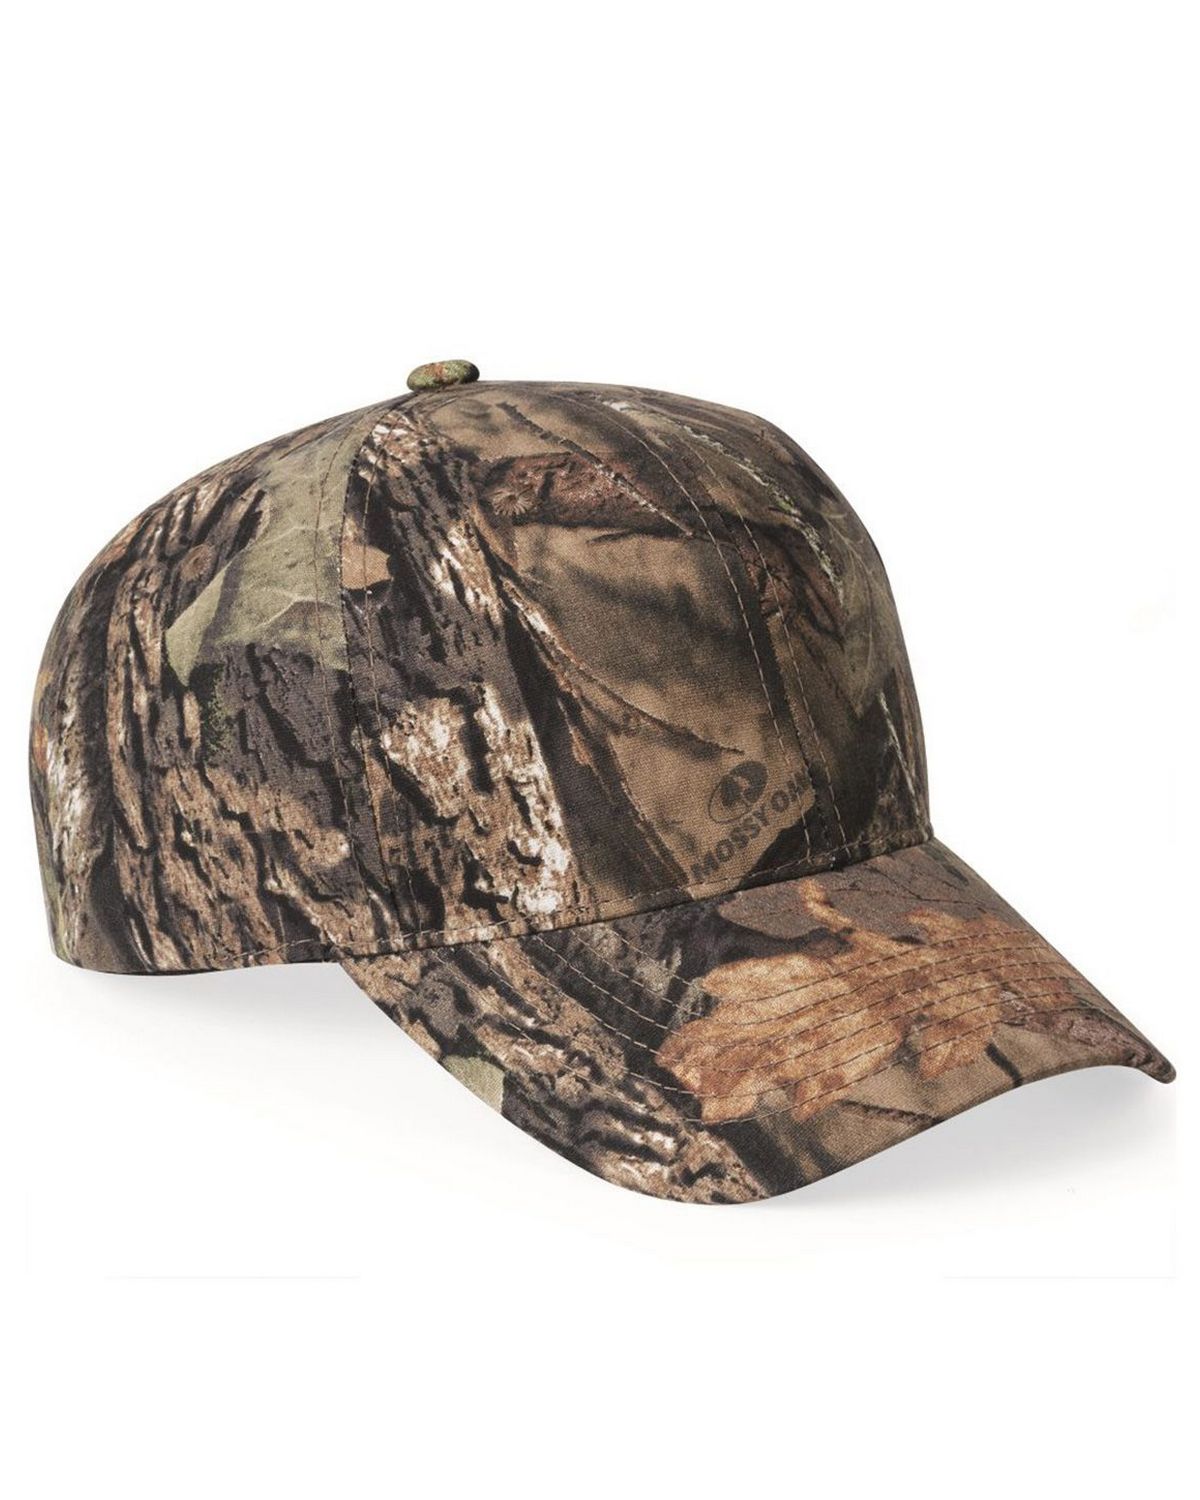 Outdoor Cap 301IS Camouflage Cap - Shop at ApparelnBags.com